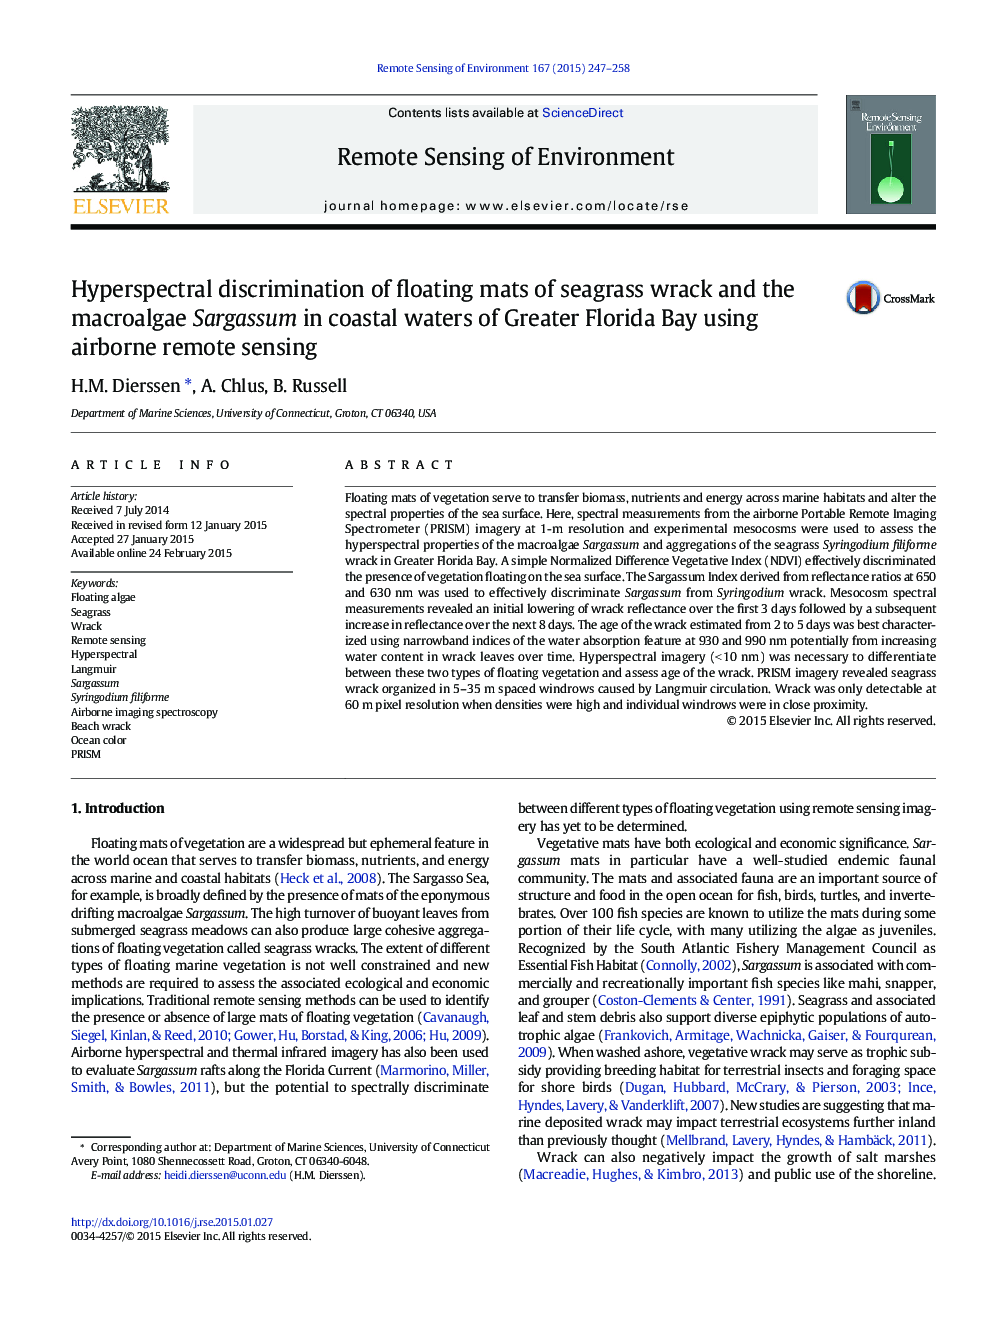 Hyperspectral discrimination of floating mats of seagrass wrack and the macroalgae Sargassum in coastal waters of Greater Florida Bay using airborne remote sensing